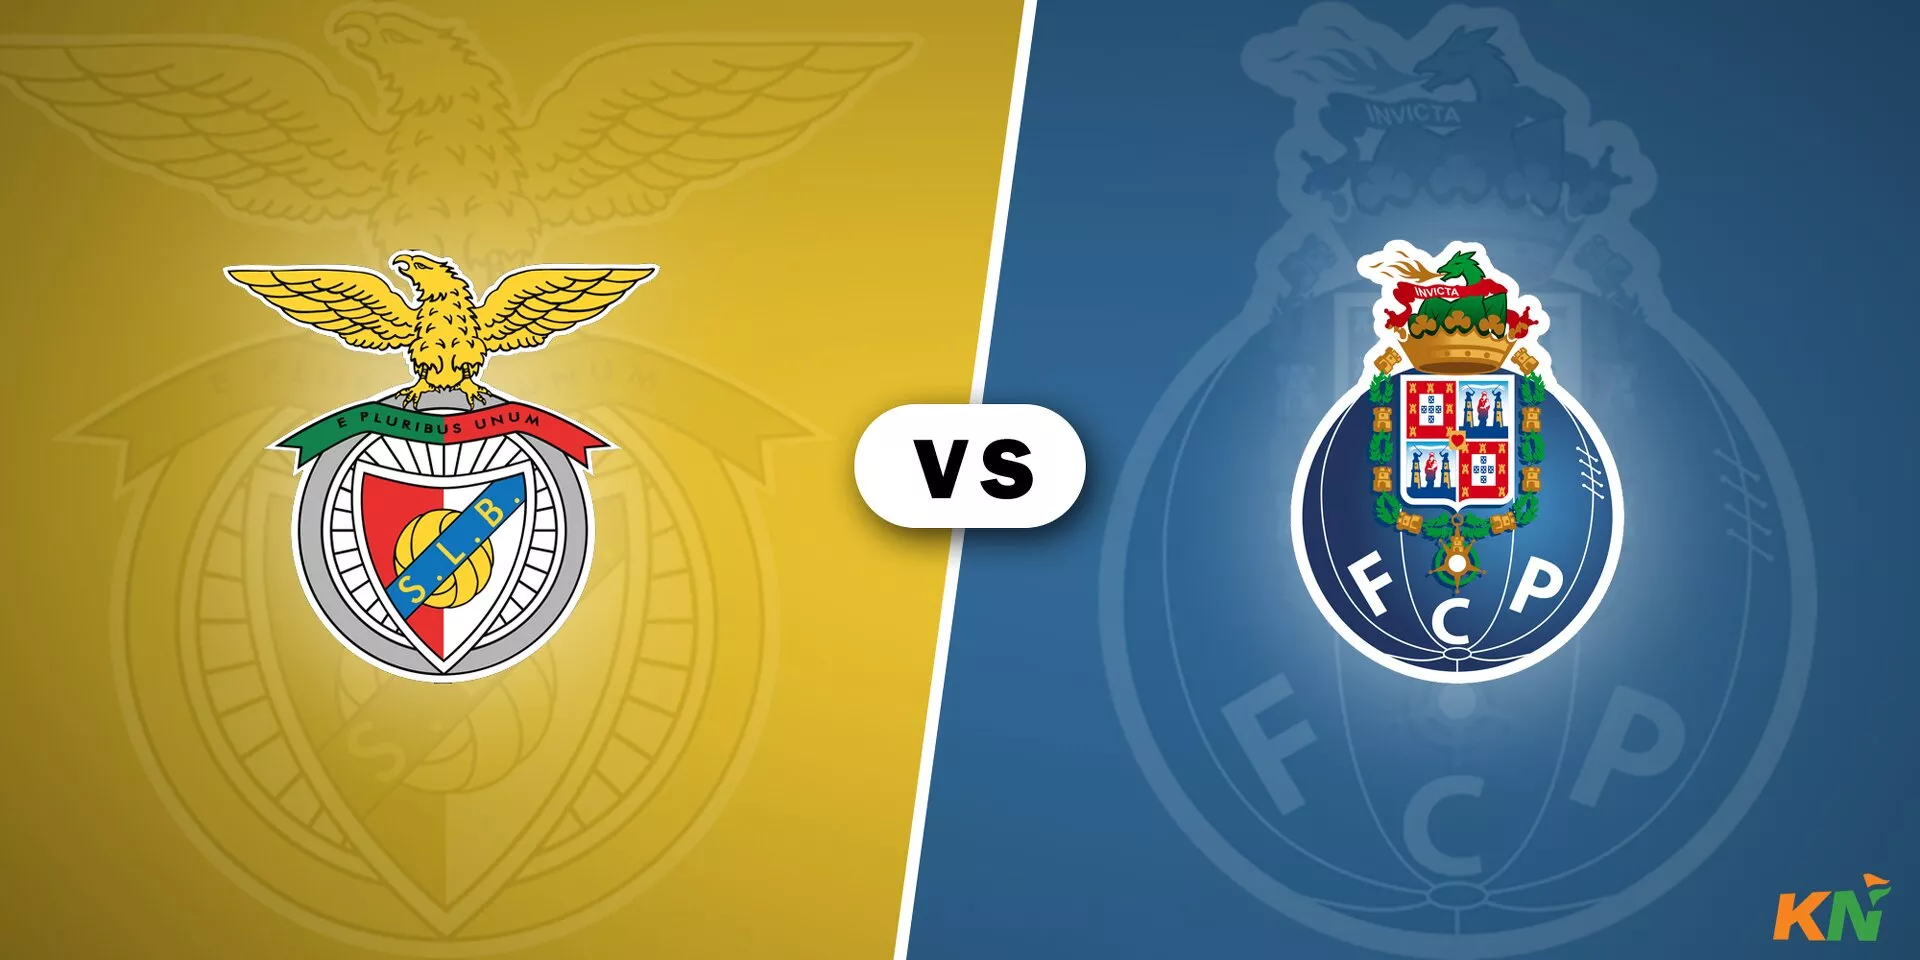 Benfica vs Porto: Where and how to watch?